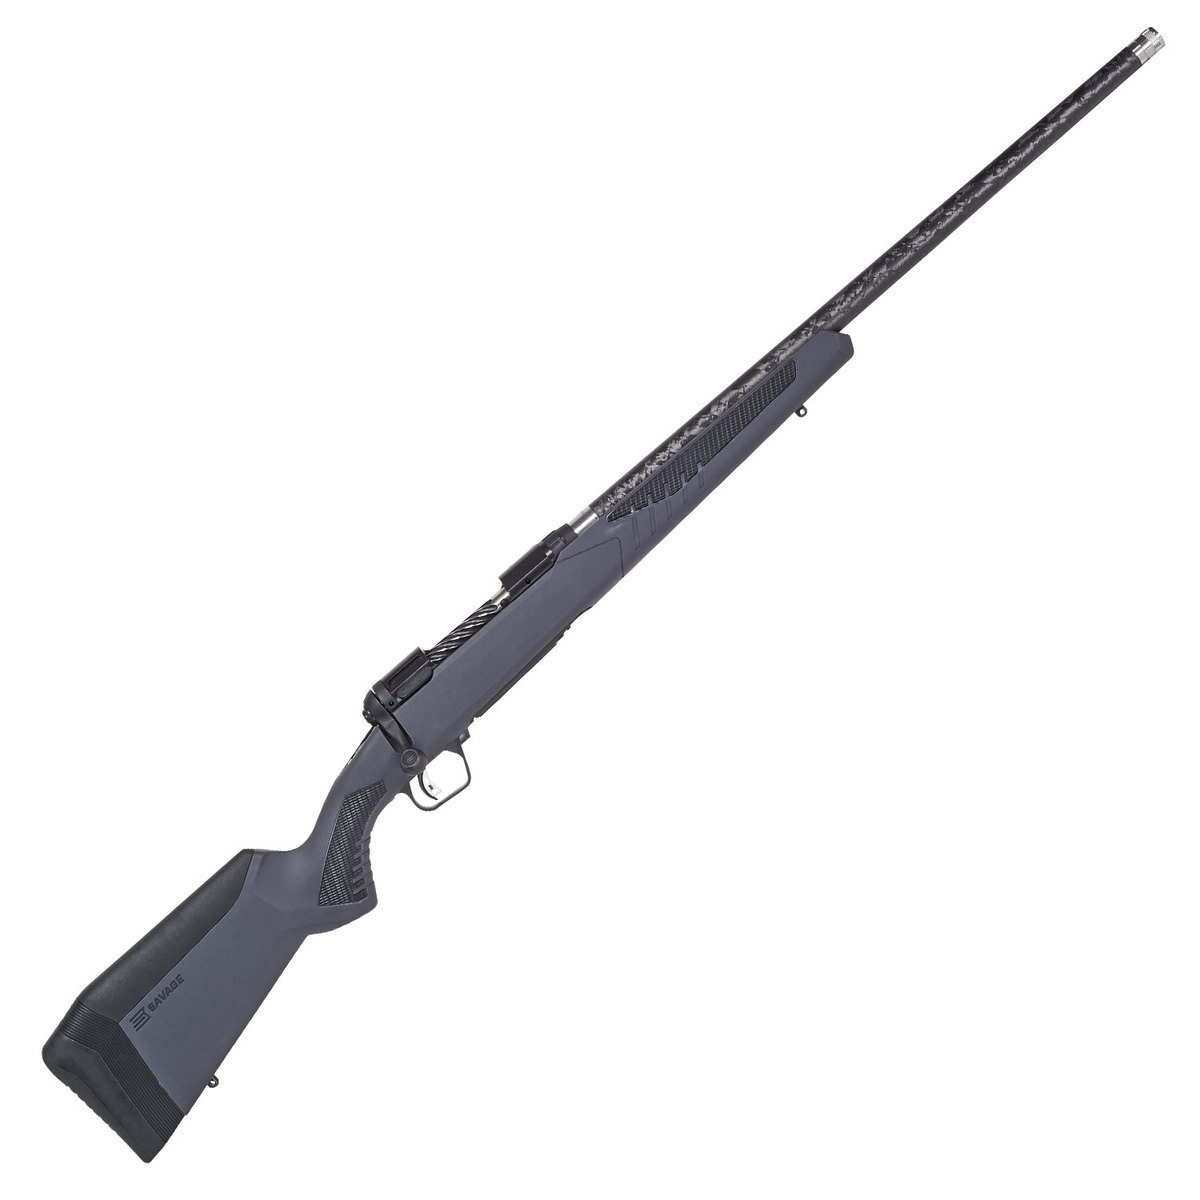 Savage 57577 110 Ultralite BA Rifle, .308 Win, Skeleton Receiver, 22 In,Threaded Barrel, GY AccuFit Stock, AccuTrigger, 4 Rnd. DBM, 0685-2340